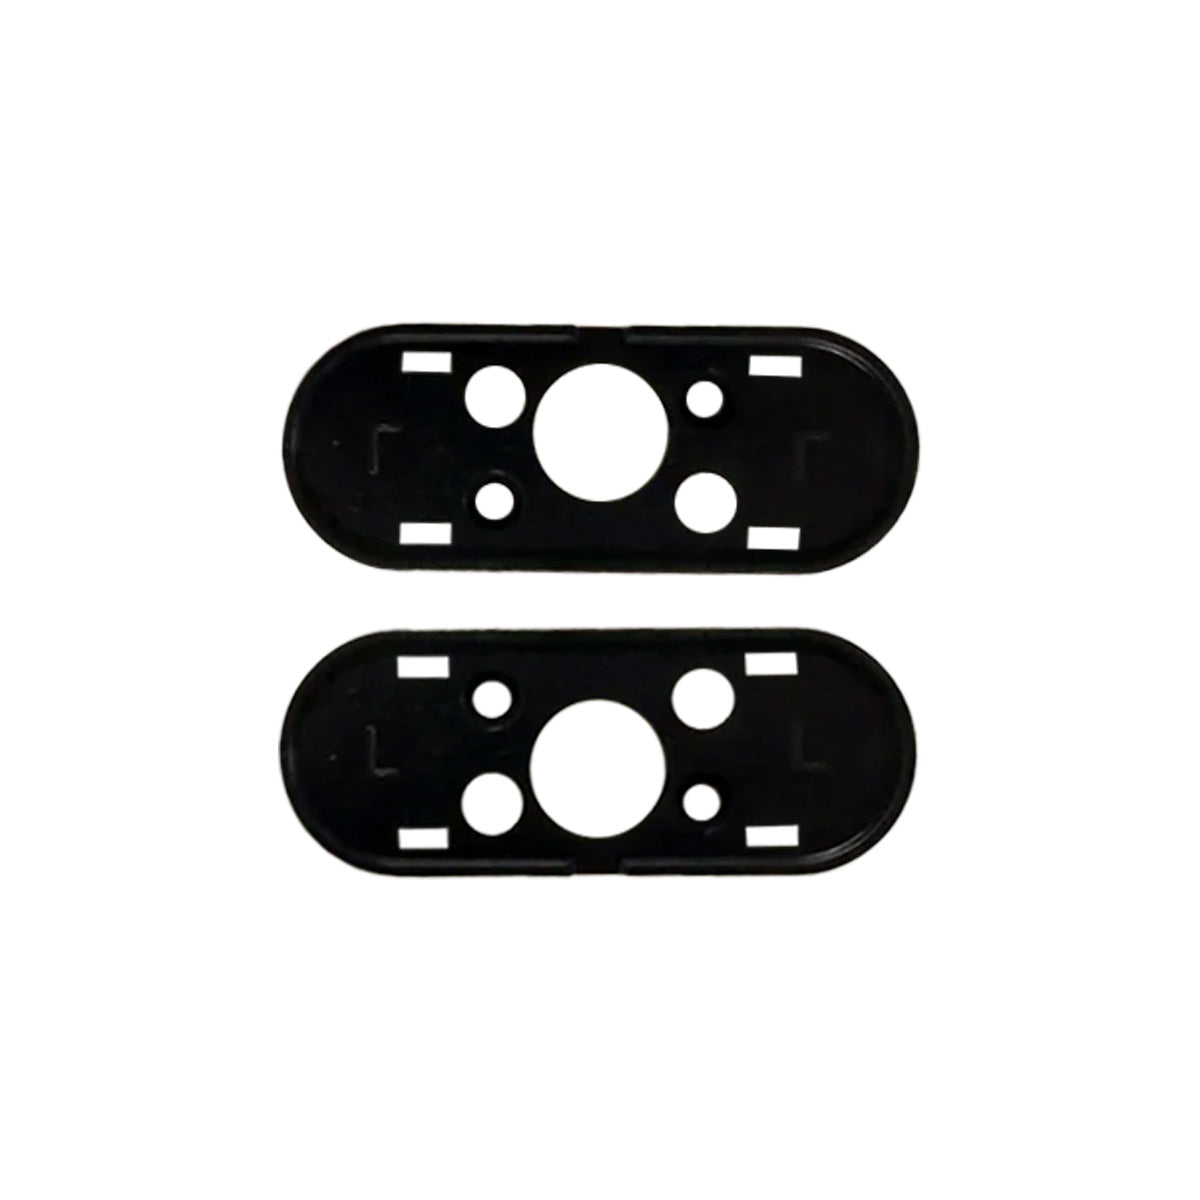 Rear Reflector Snap Fit Bases Kit - Only fits Air³ scooters